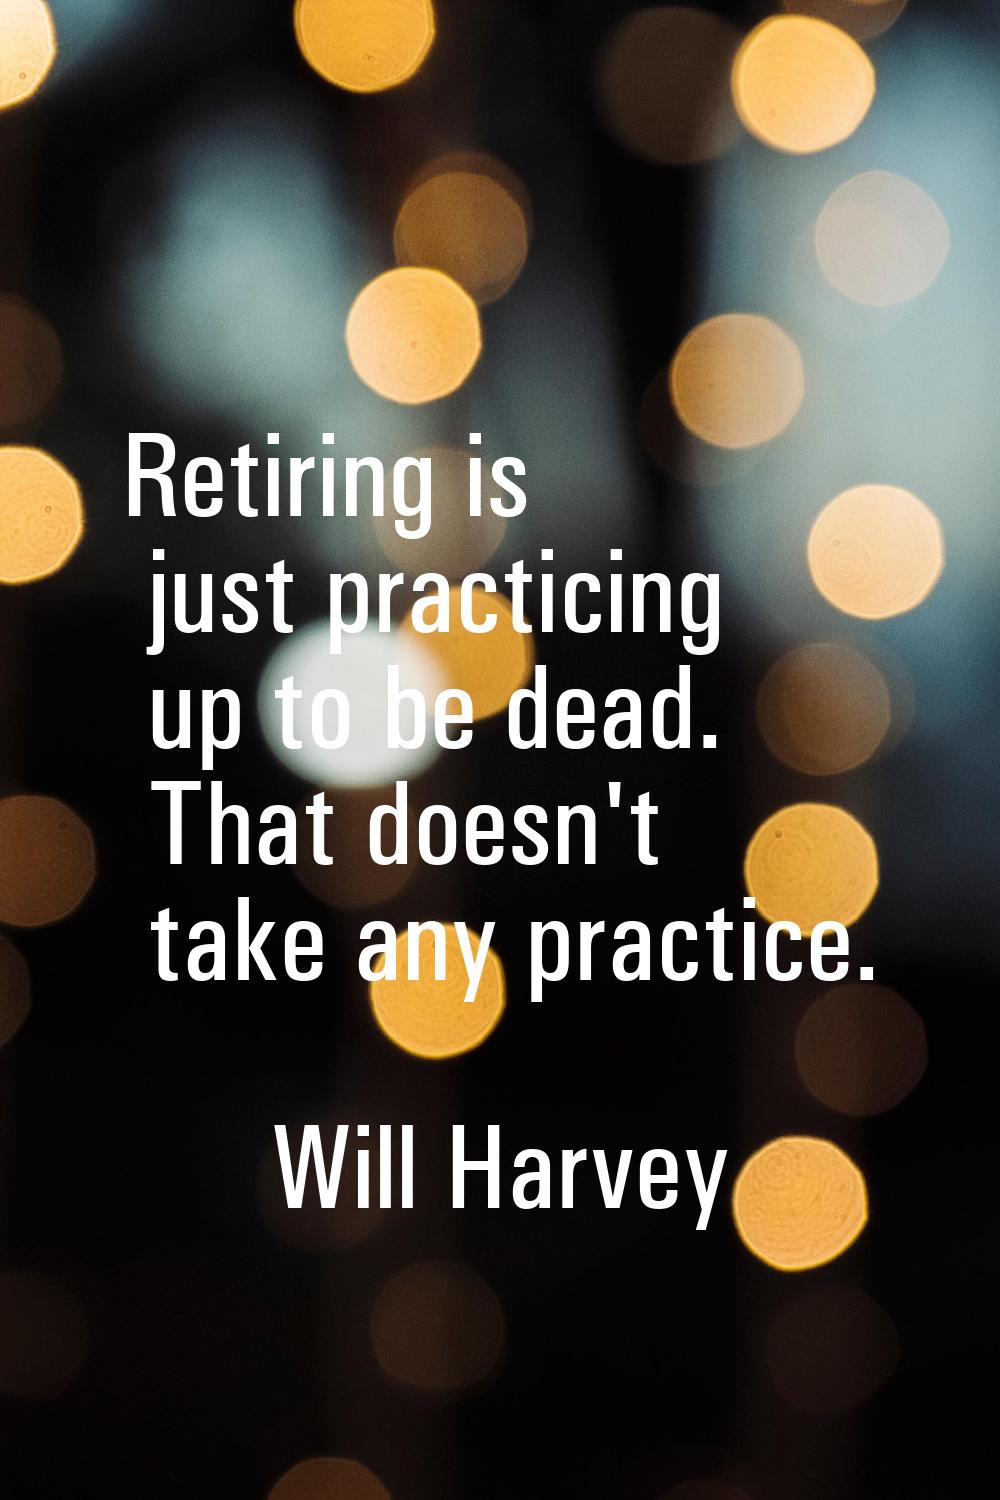 Retiring is just practicing up to be dead. That doesn't take any practice.